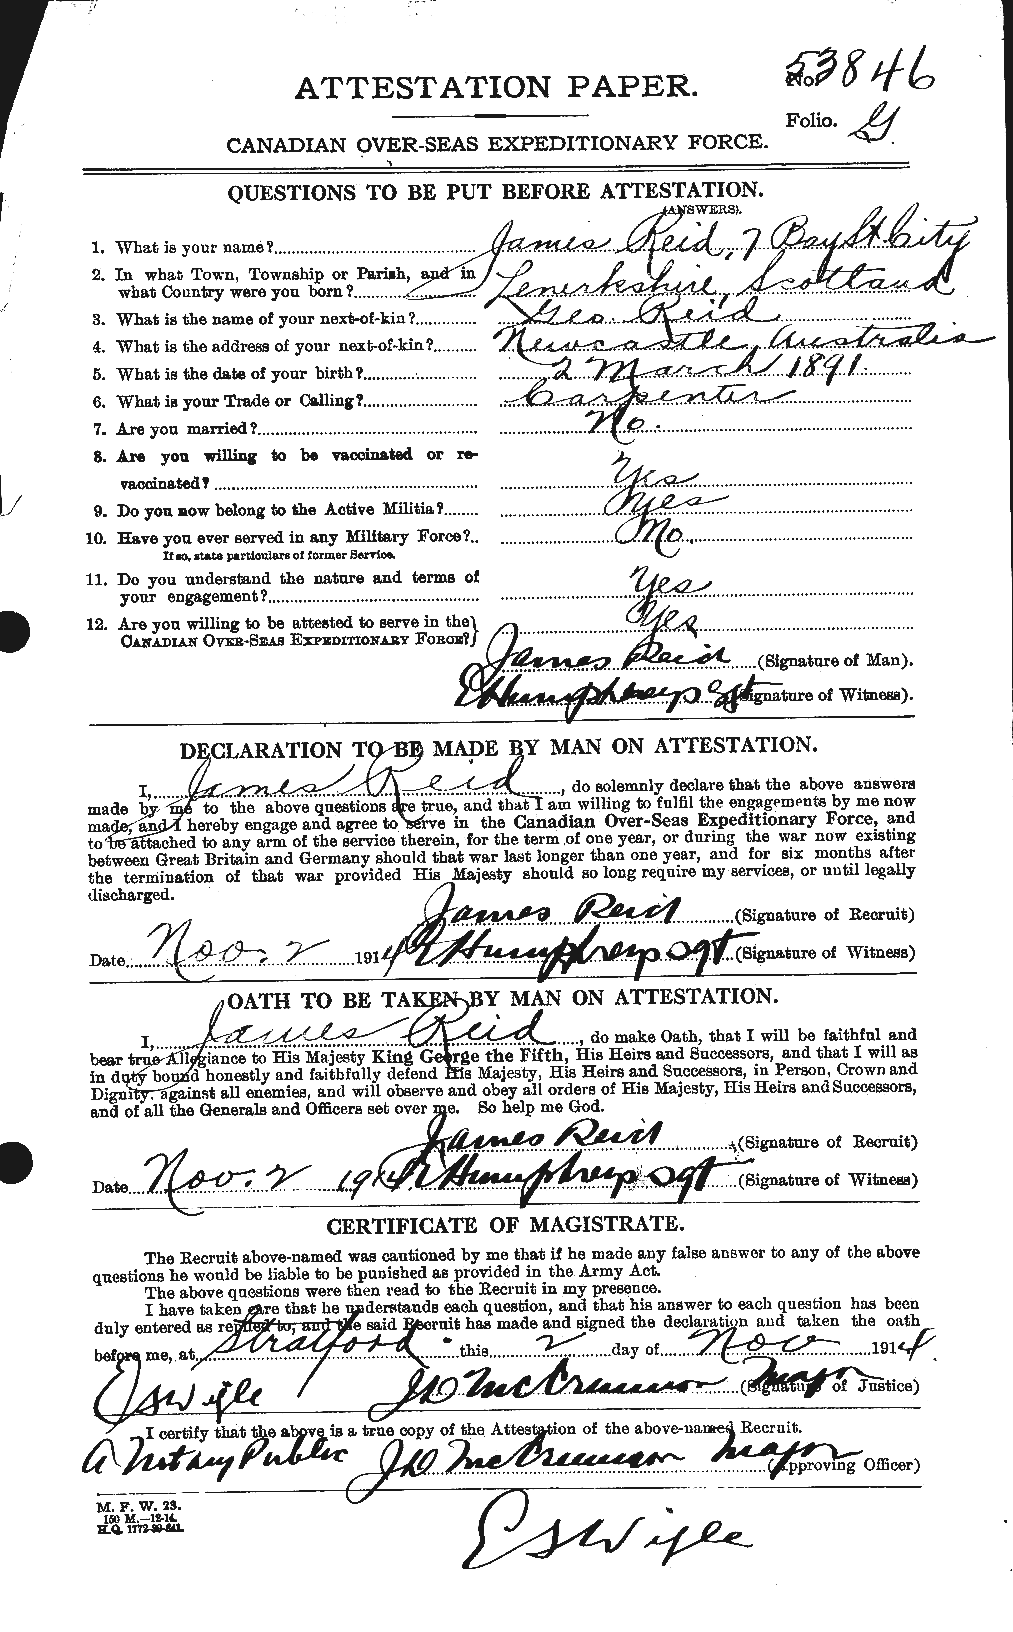 Personnel Records of the First World War - CEF 598686a